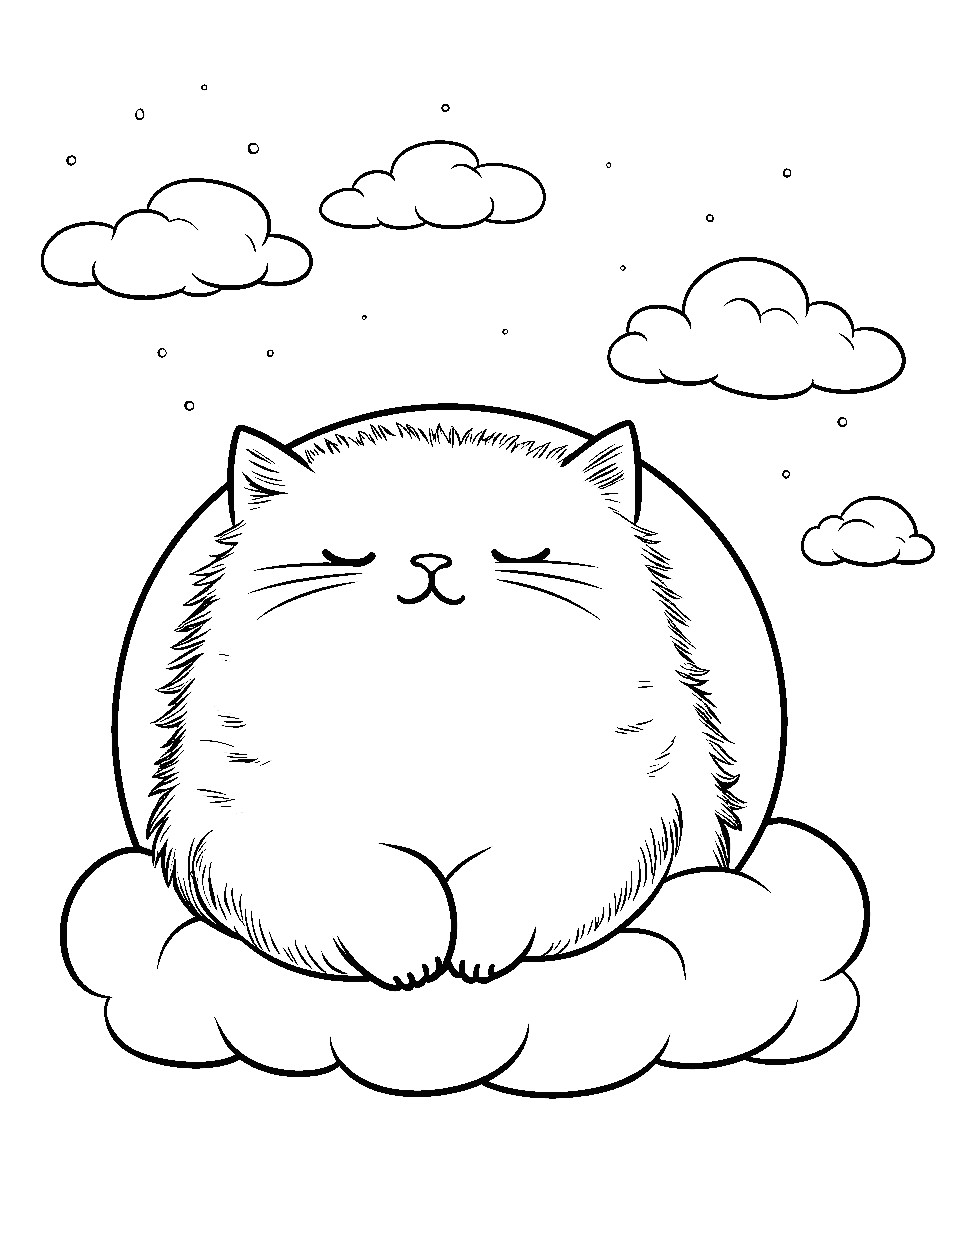 Dreamy Clouds Coloring Page - Pusheen lounging on a fluffy cloud.